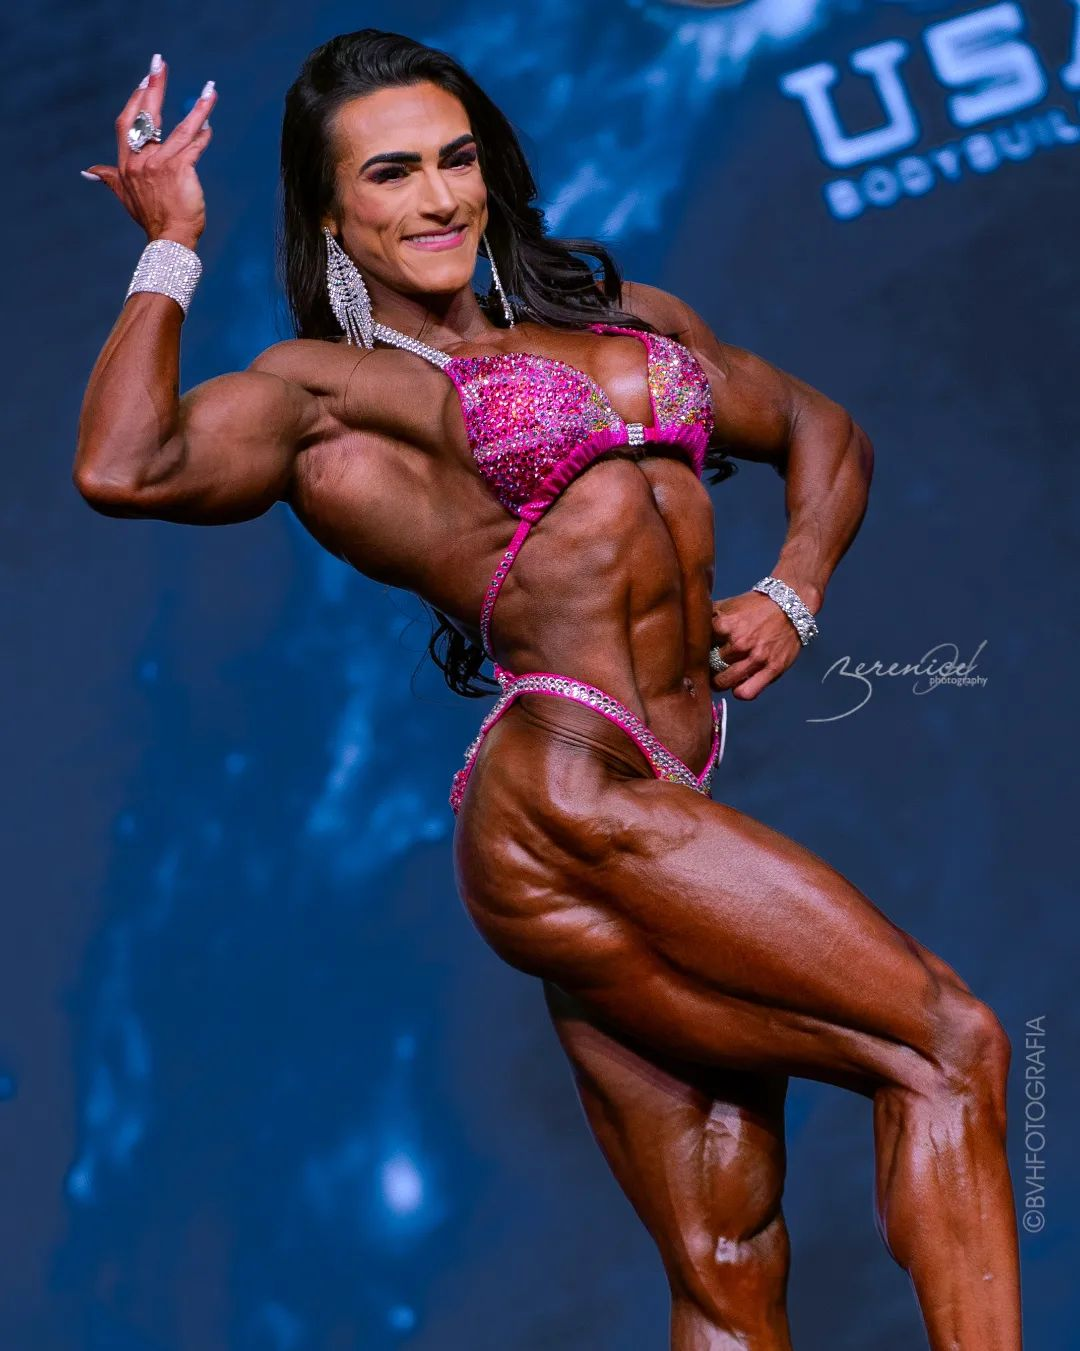 olympia women's physique